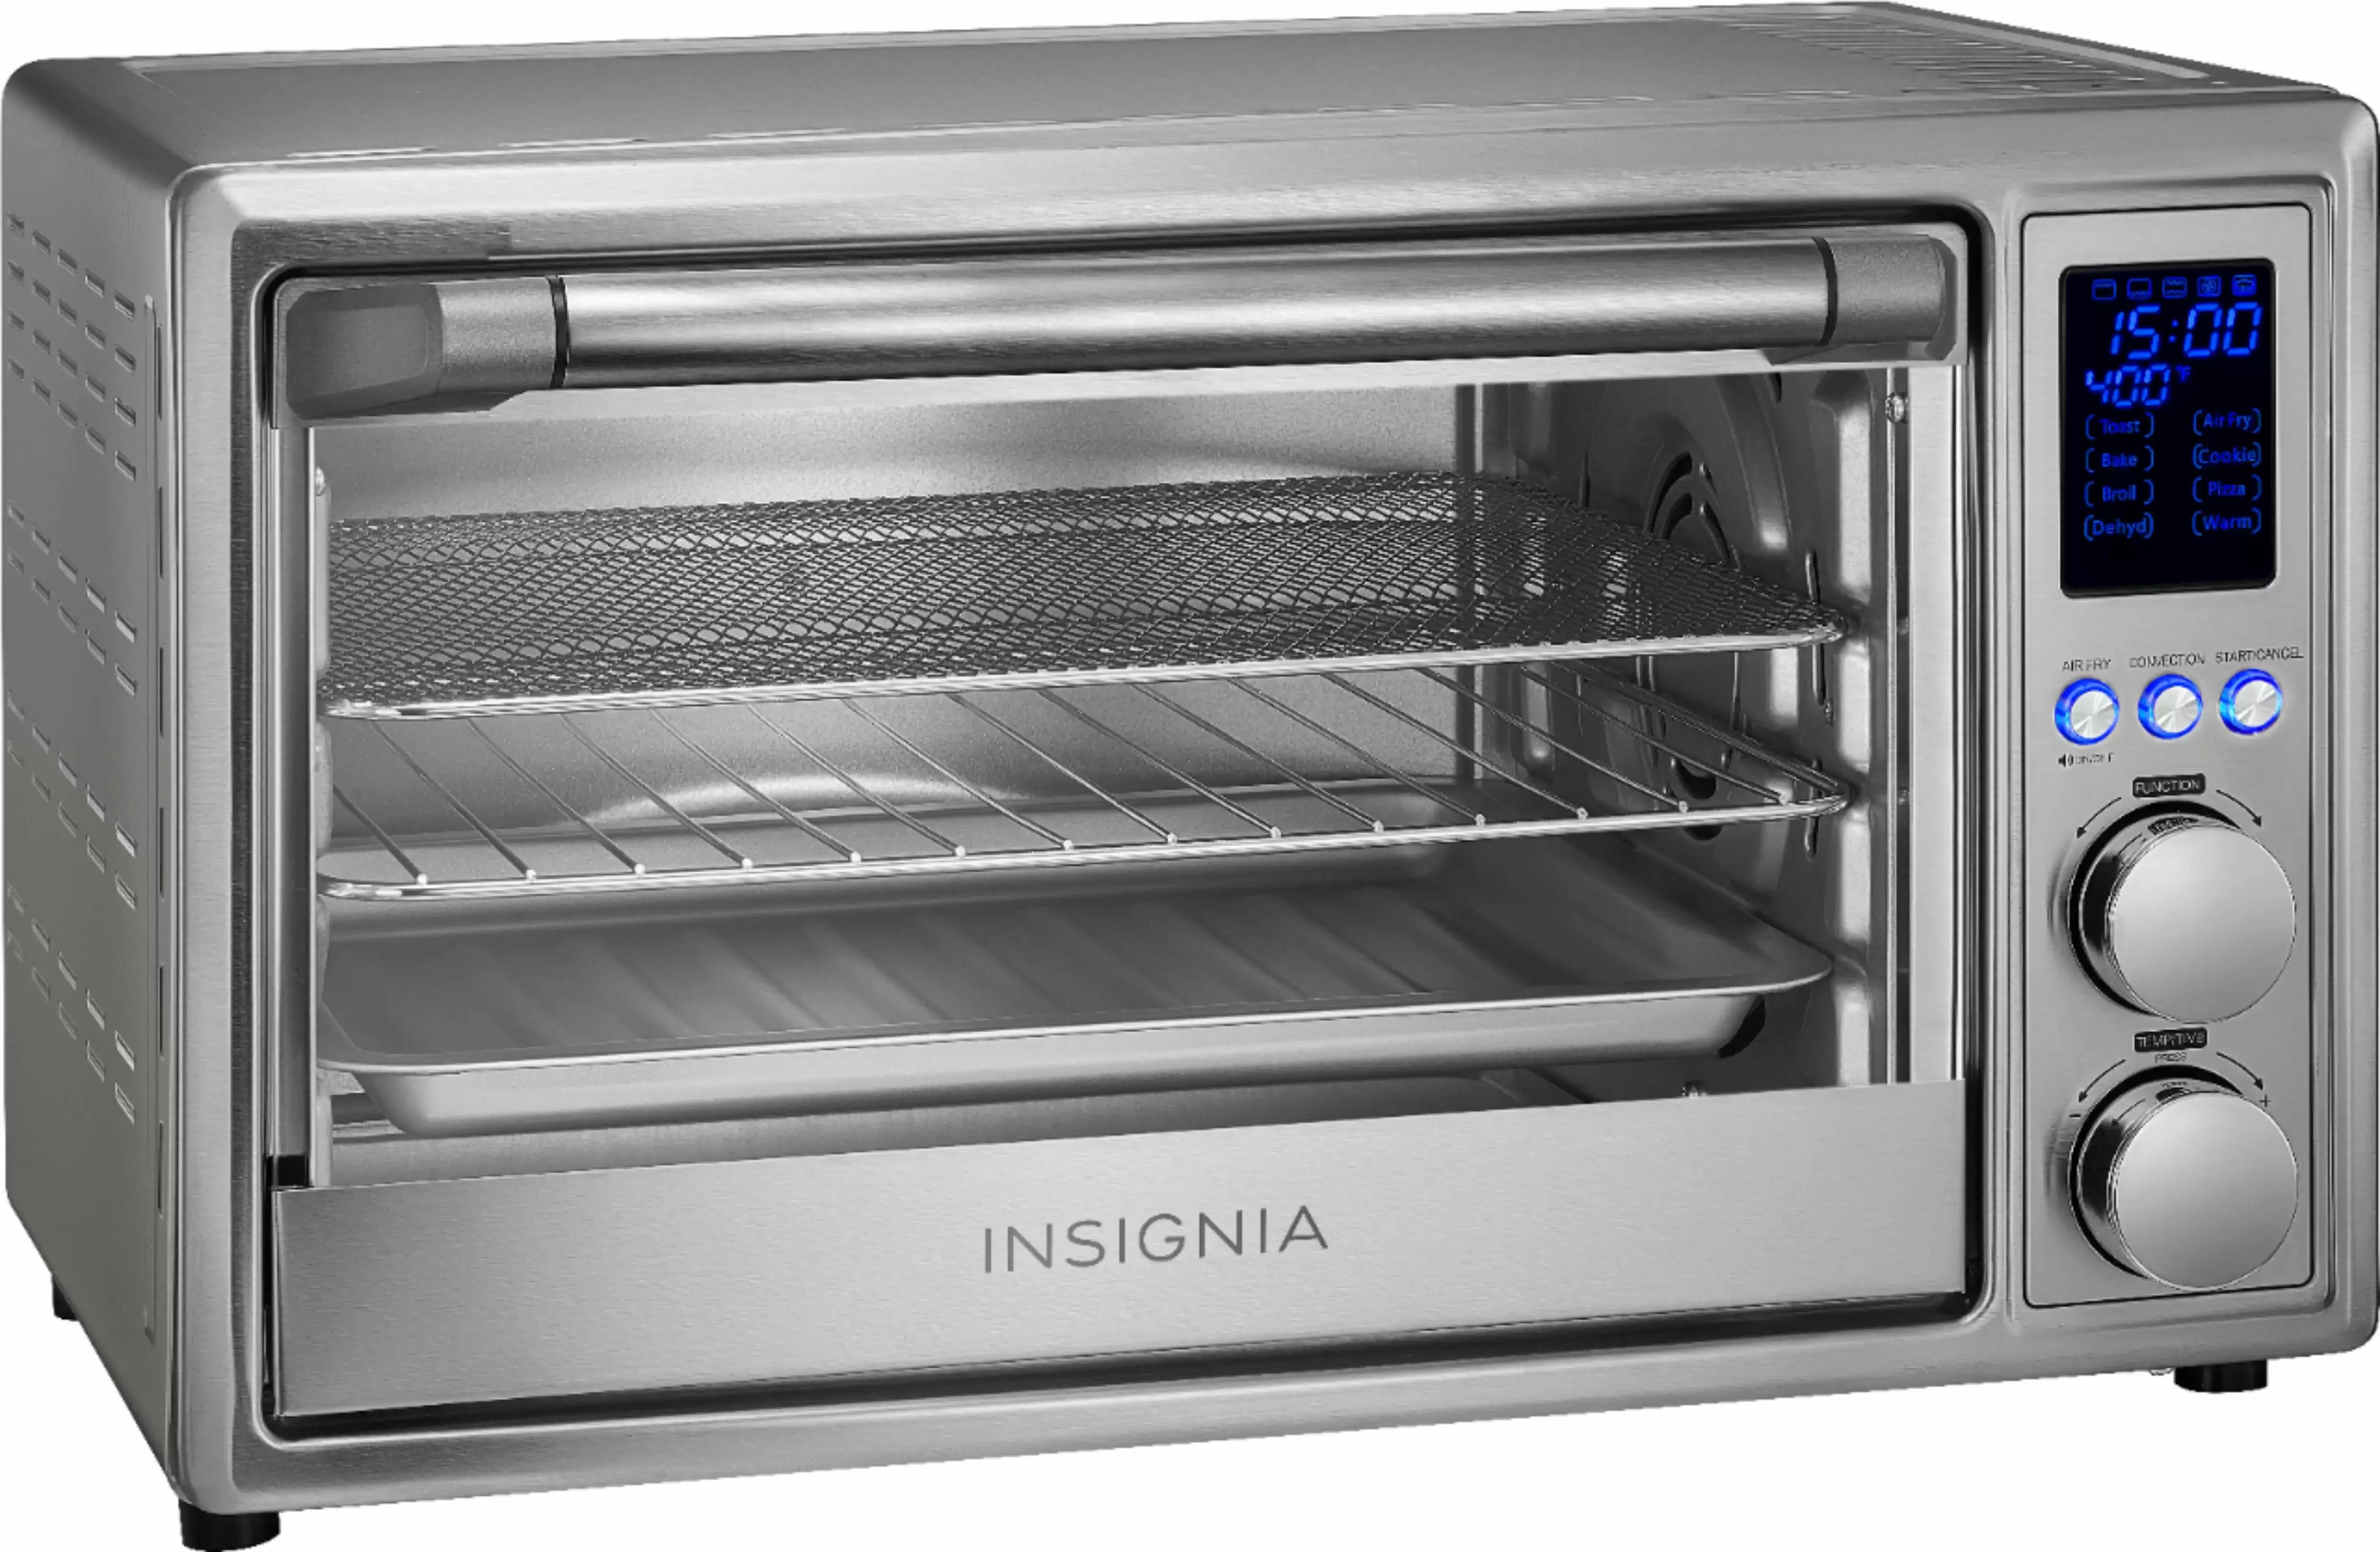 Insignia 6-Slice Toaster Oven Air Fryer for $59.99 Shipped